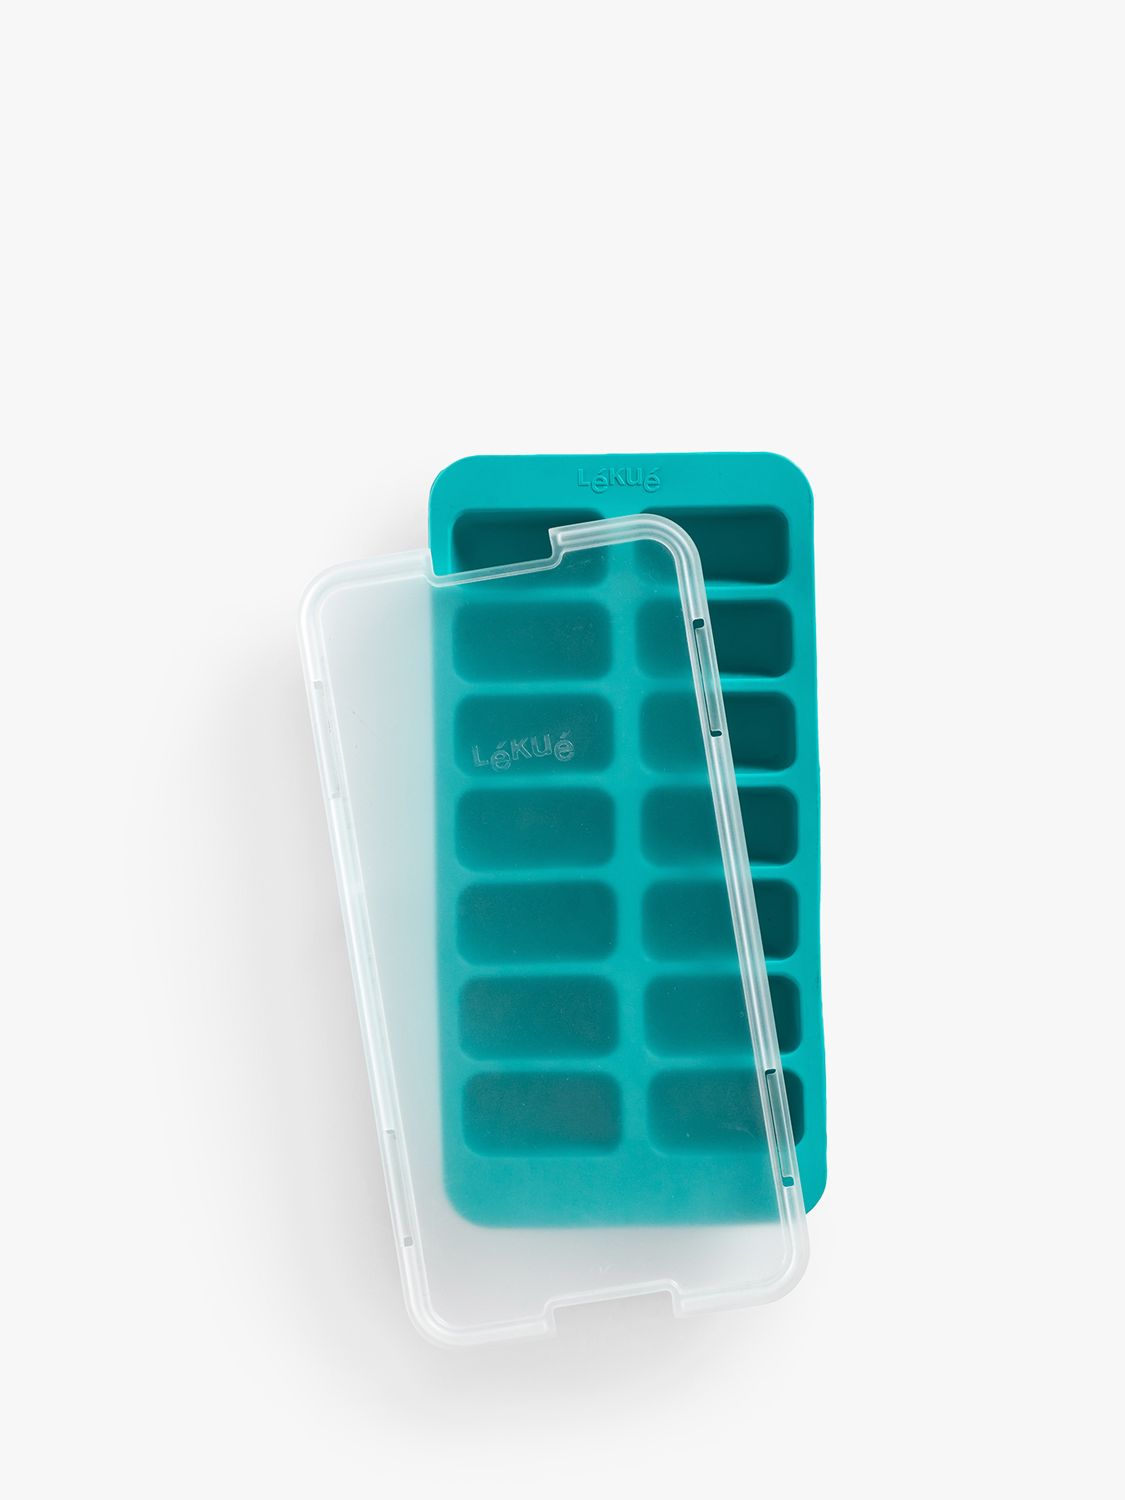 Standard Blue Ice Cube Maker Silicone, For Home And Office